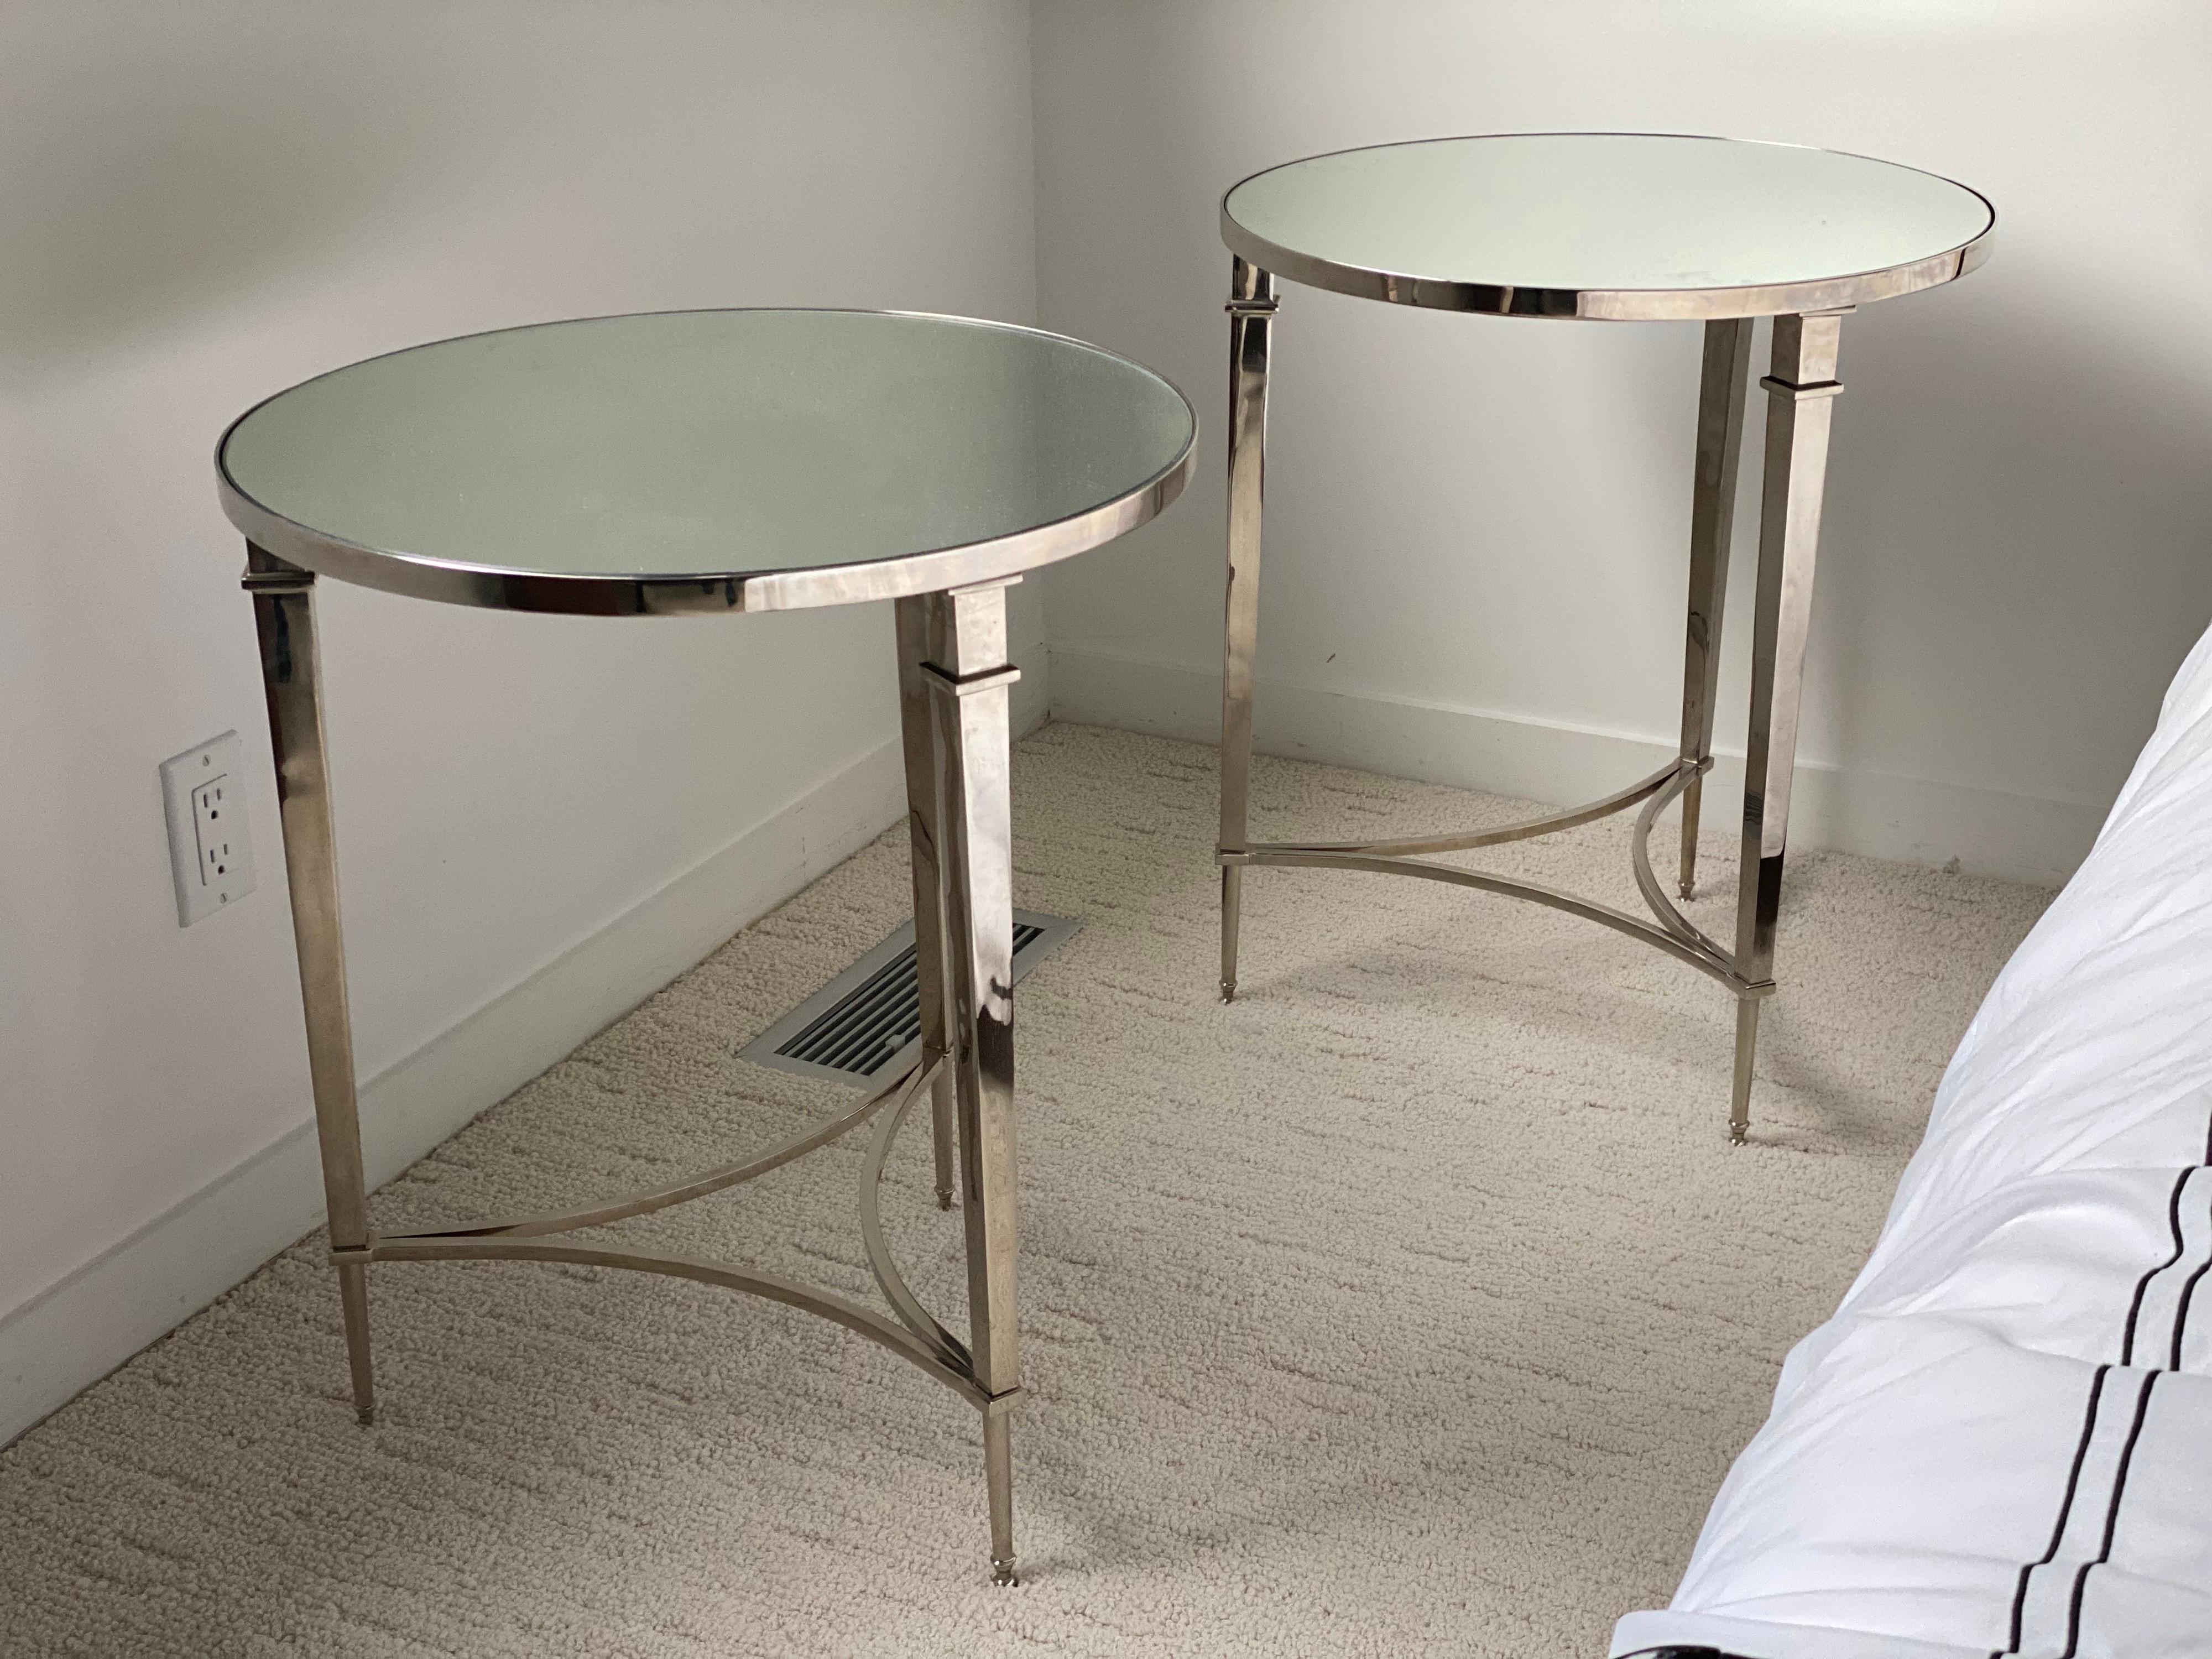 Pair of Modern Directoire style round Nickel end tables with mirror tops.
Three classic, straight tapered legs connected by elegant curved supports and inset mirrored top. These are great looking and classic. They could be paired with antiques or